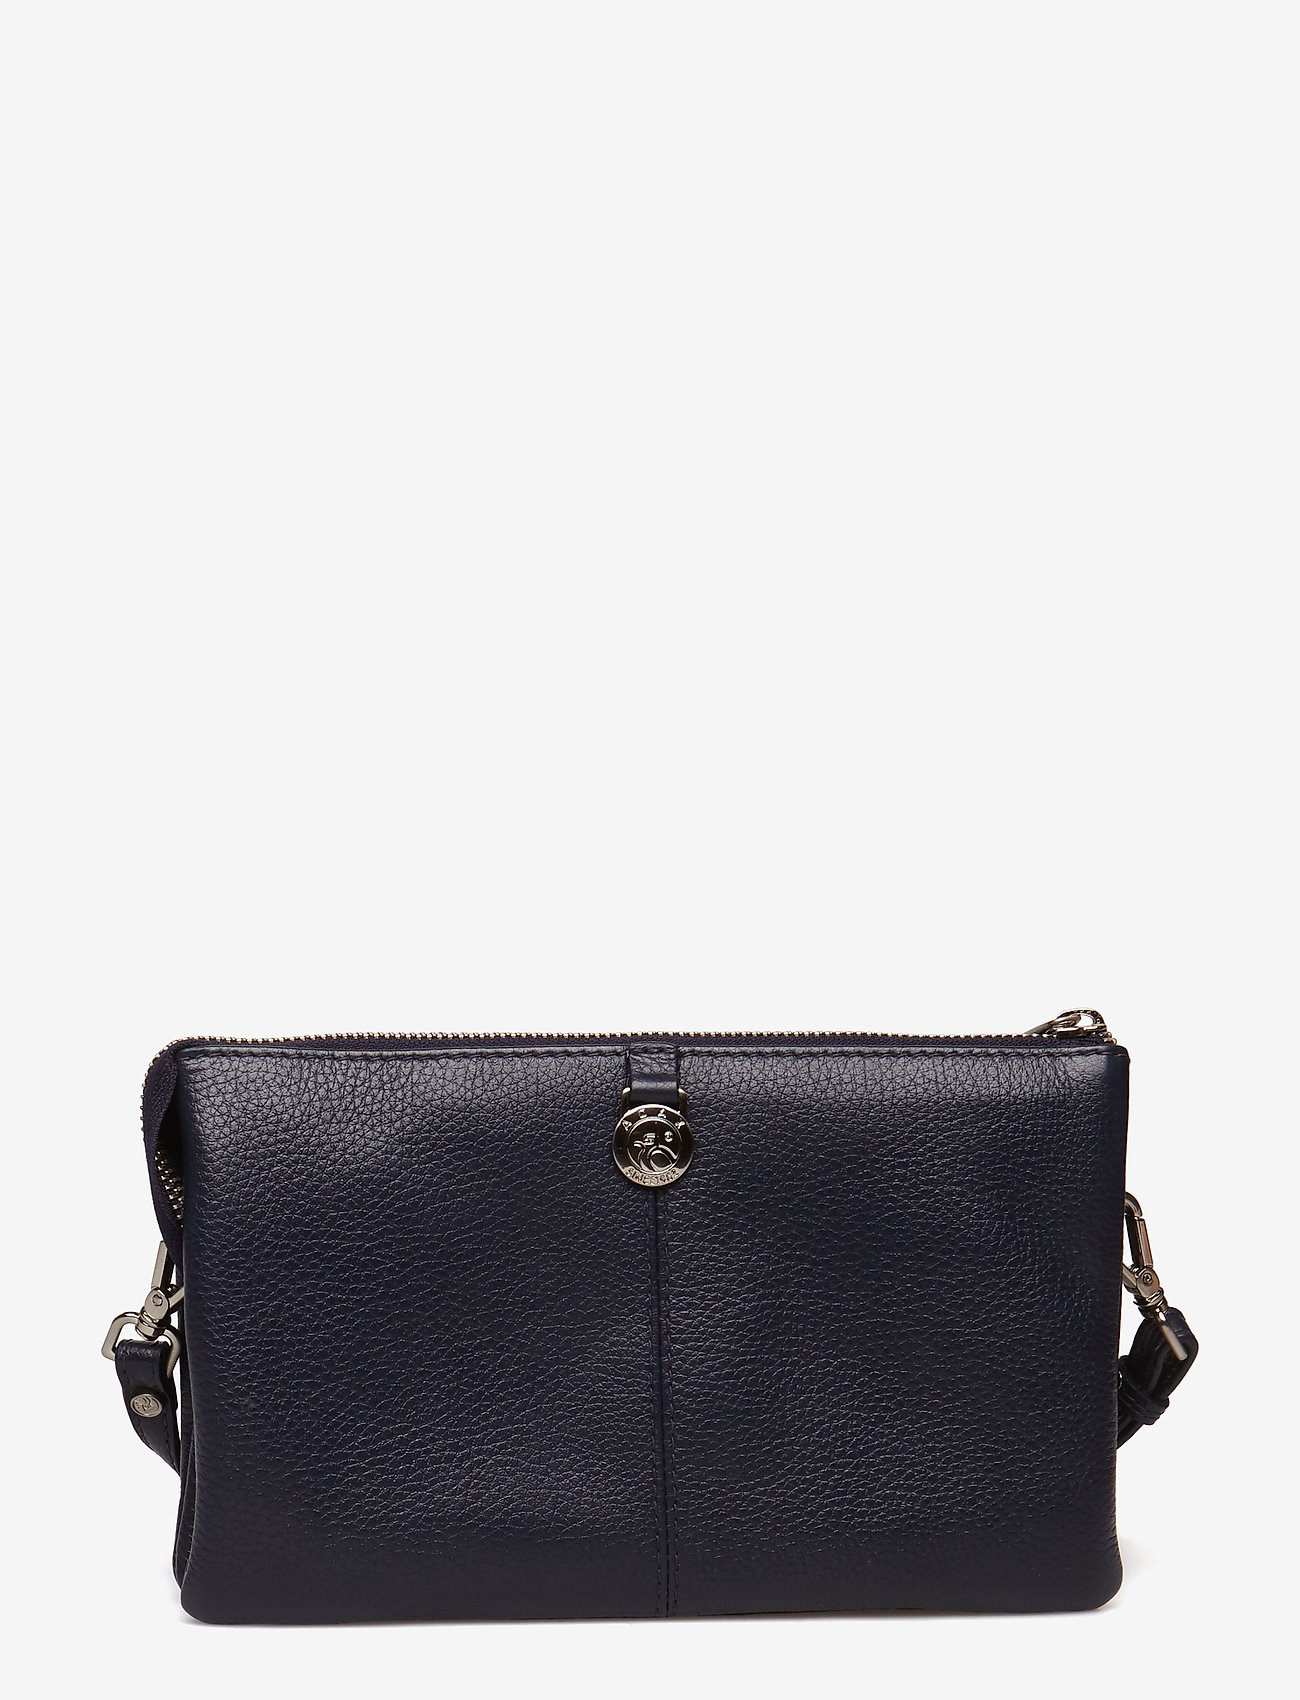 Adax - Cormorano combi clutch Silja - party wear at outlet prices - navy - 1